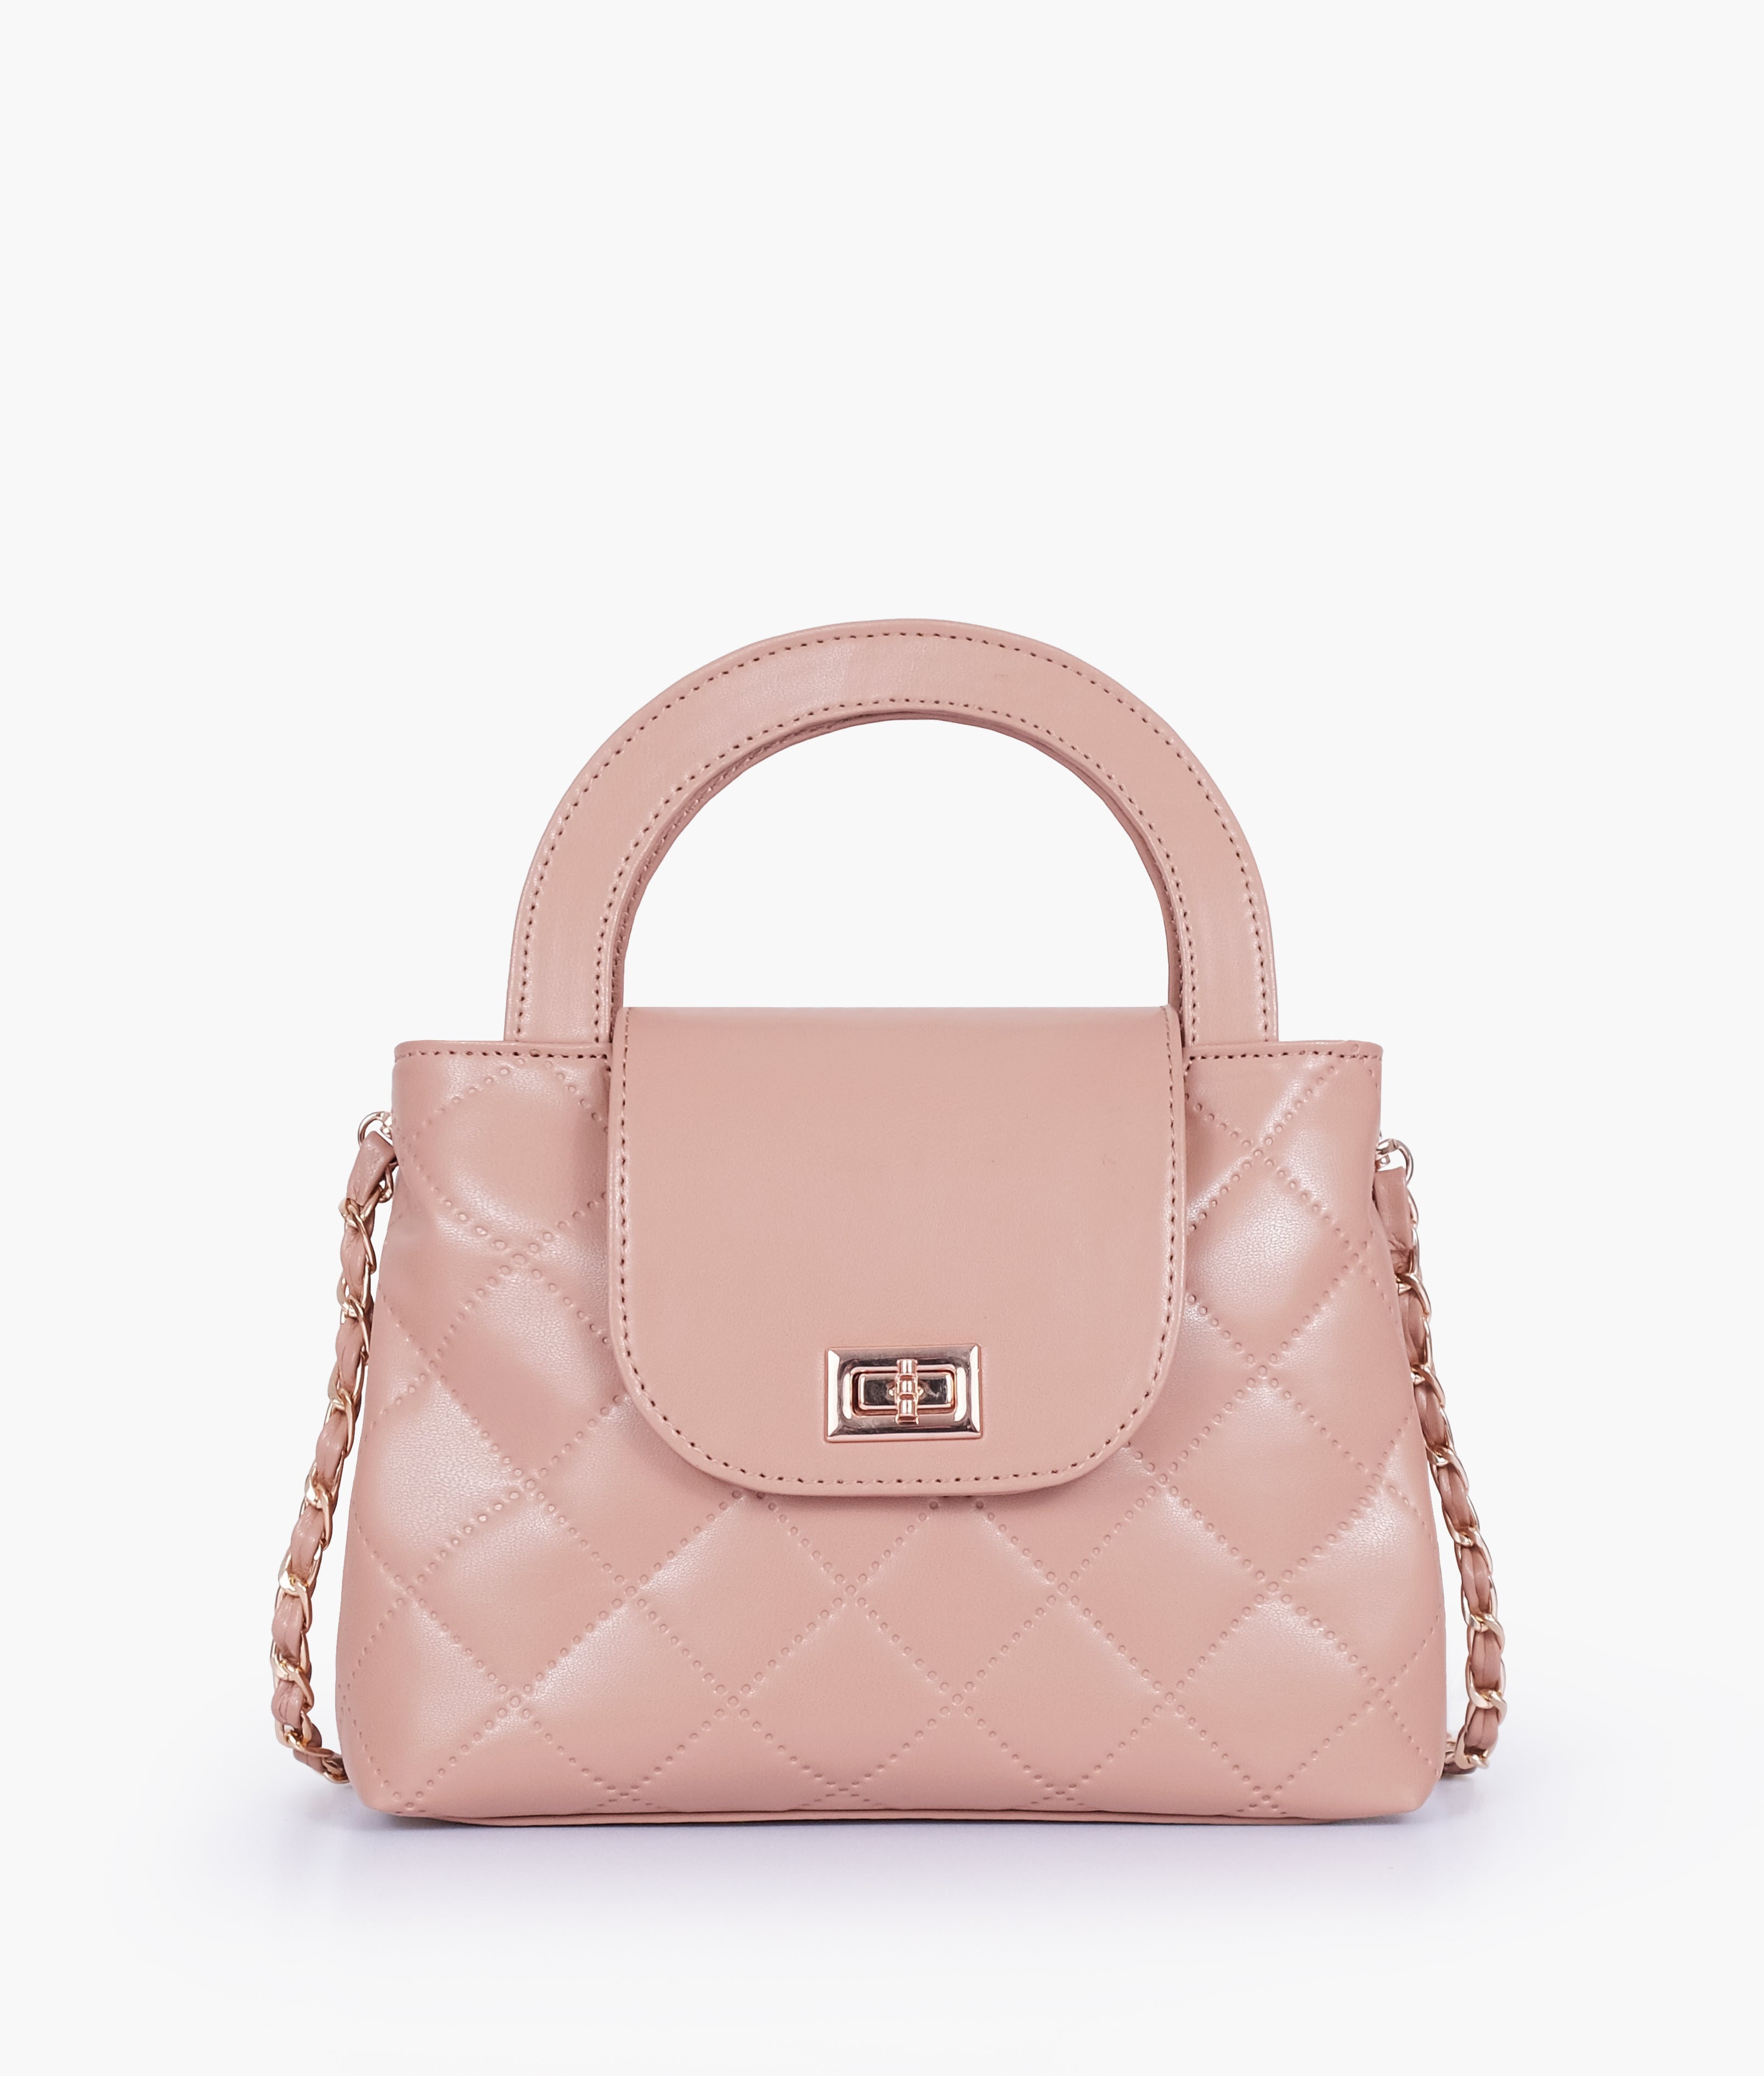 Baby pink flap quilted bag with top handle